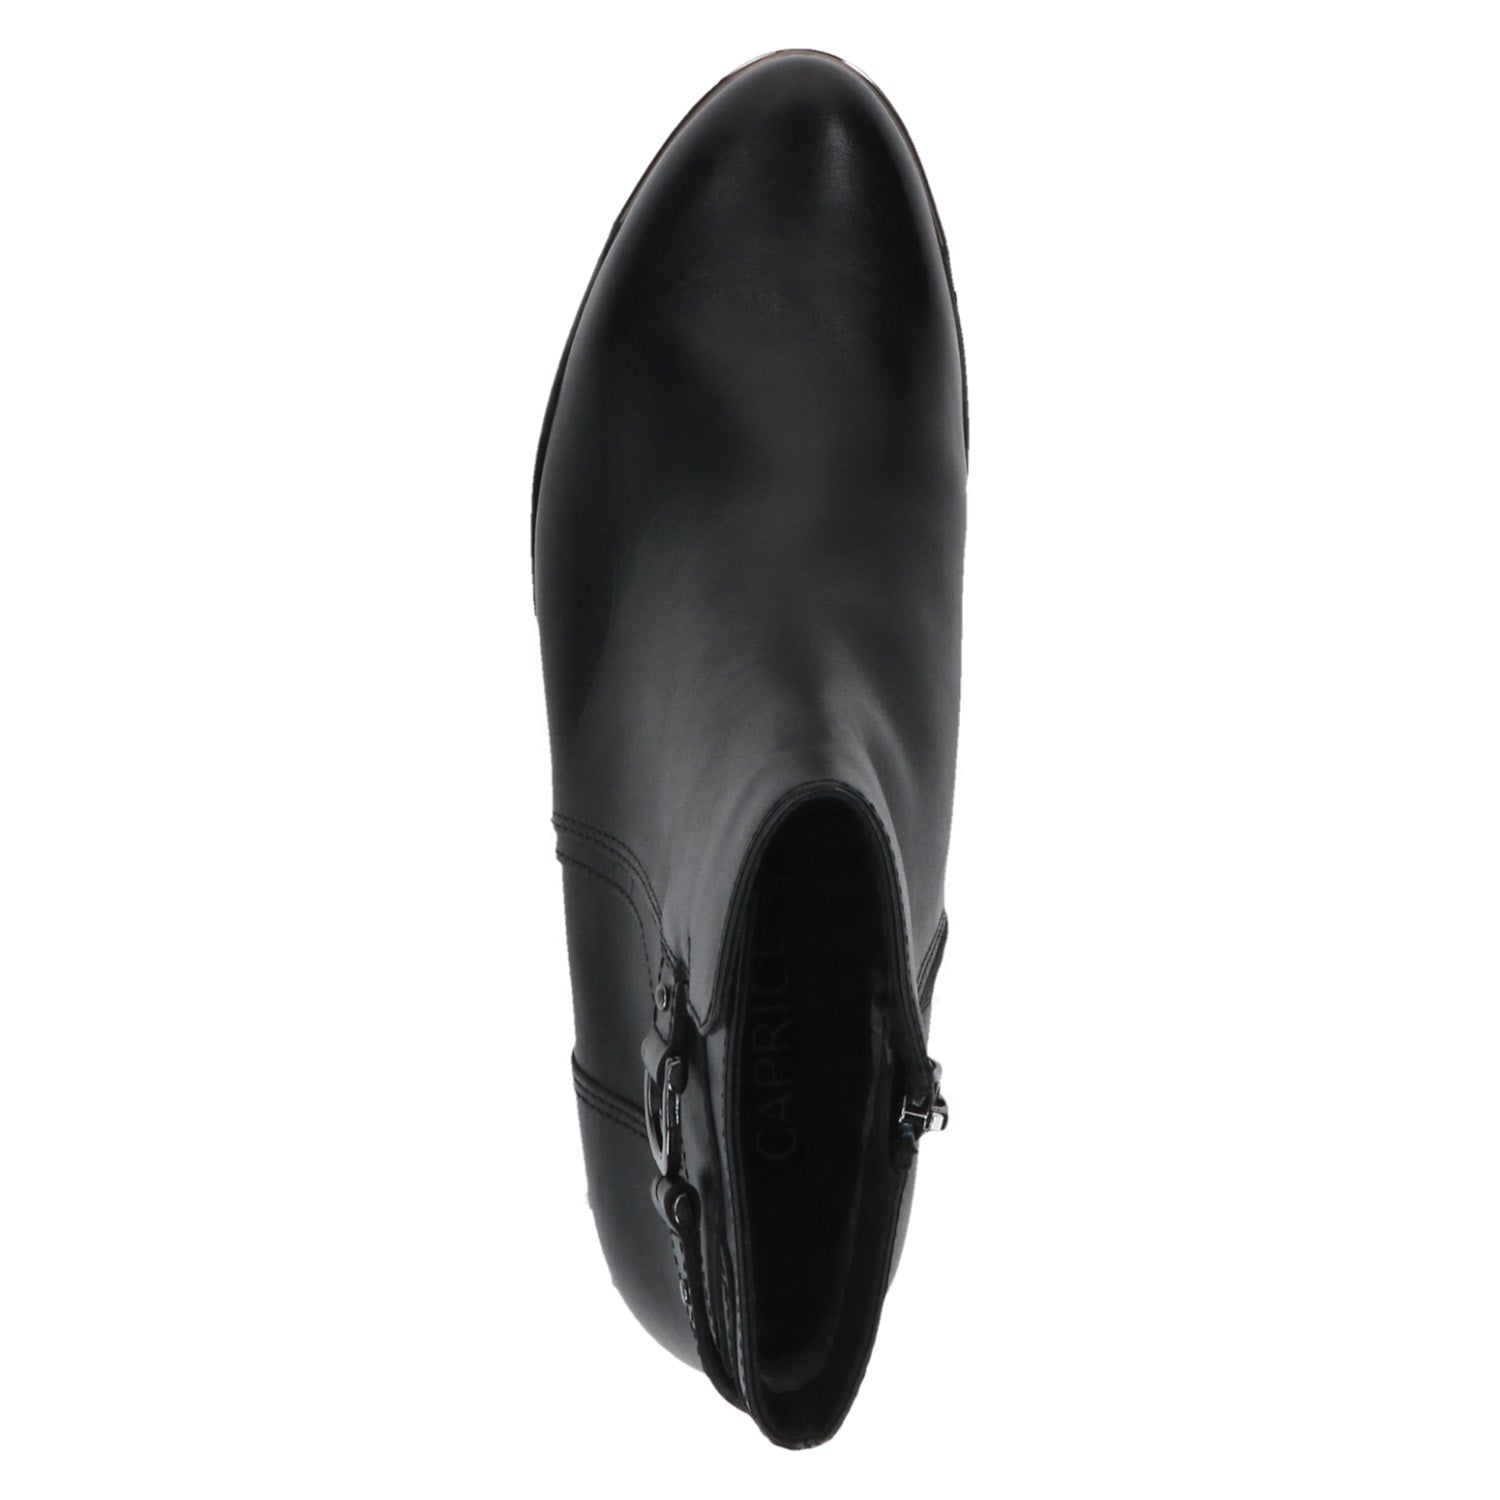 Top view of Caprice Black Leather Ankle Boot.